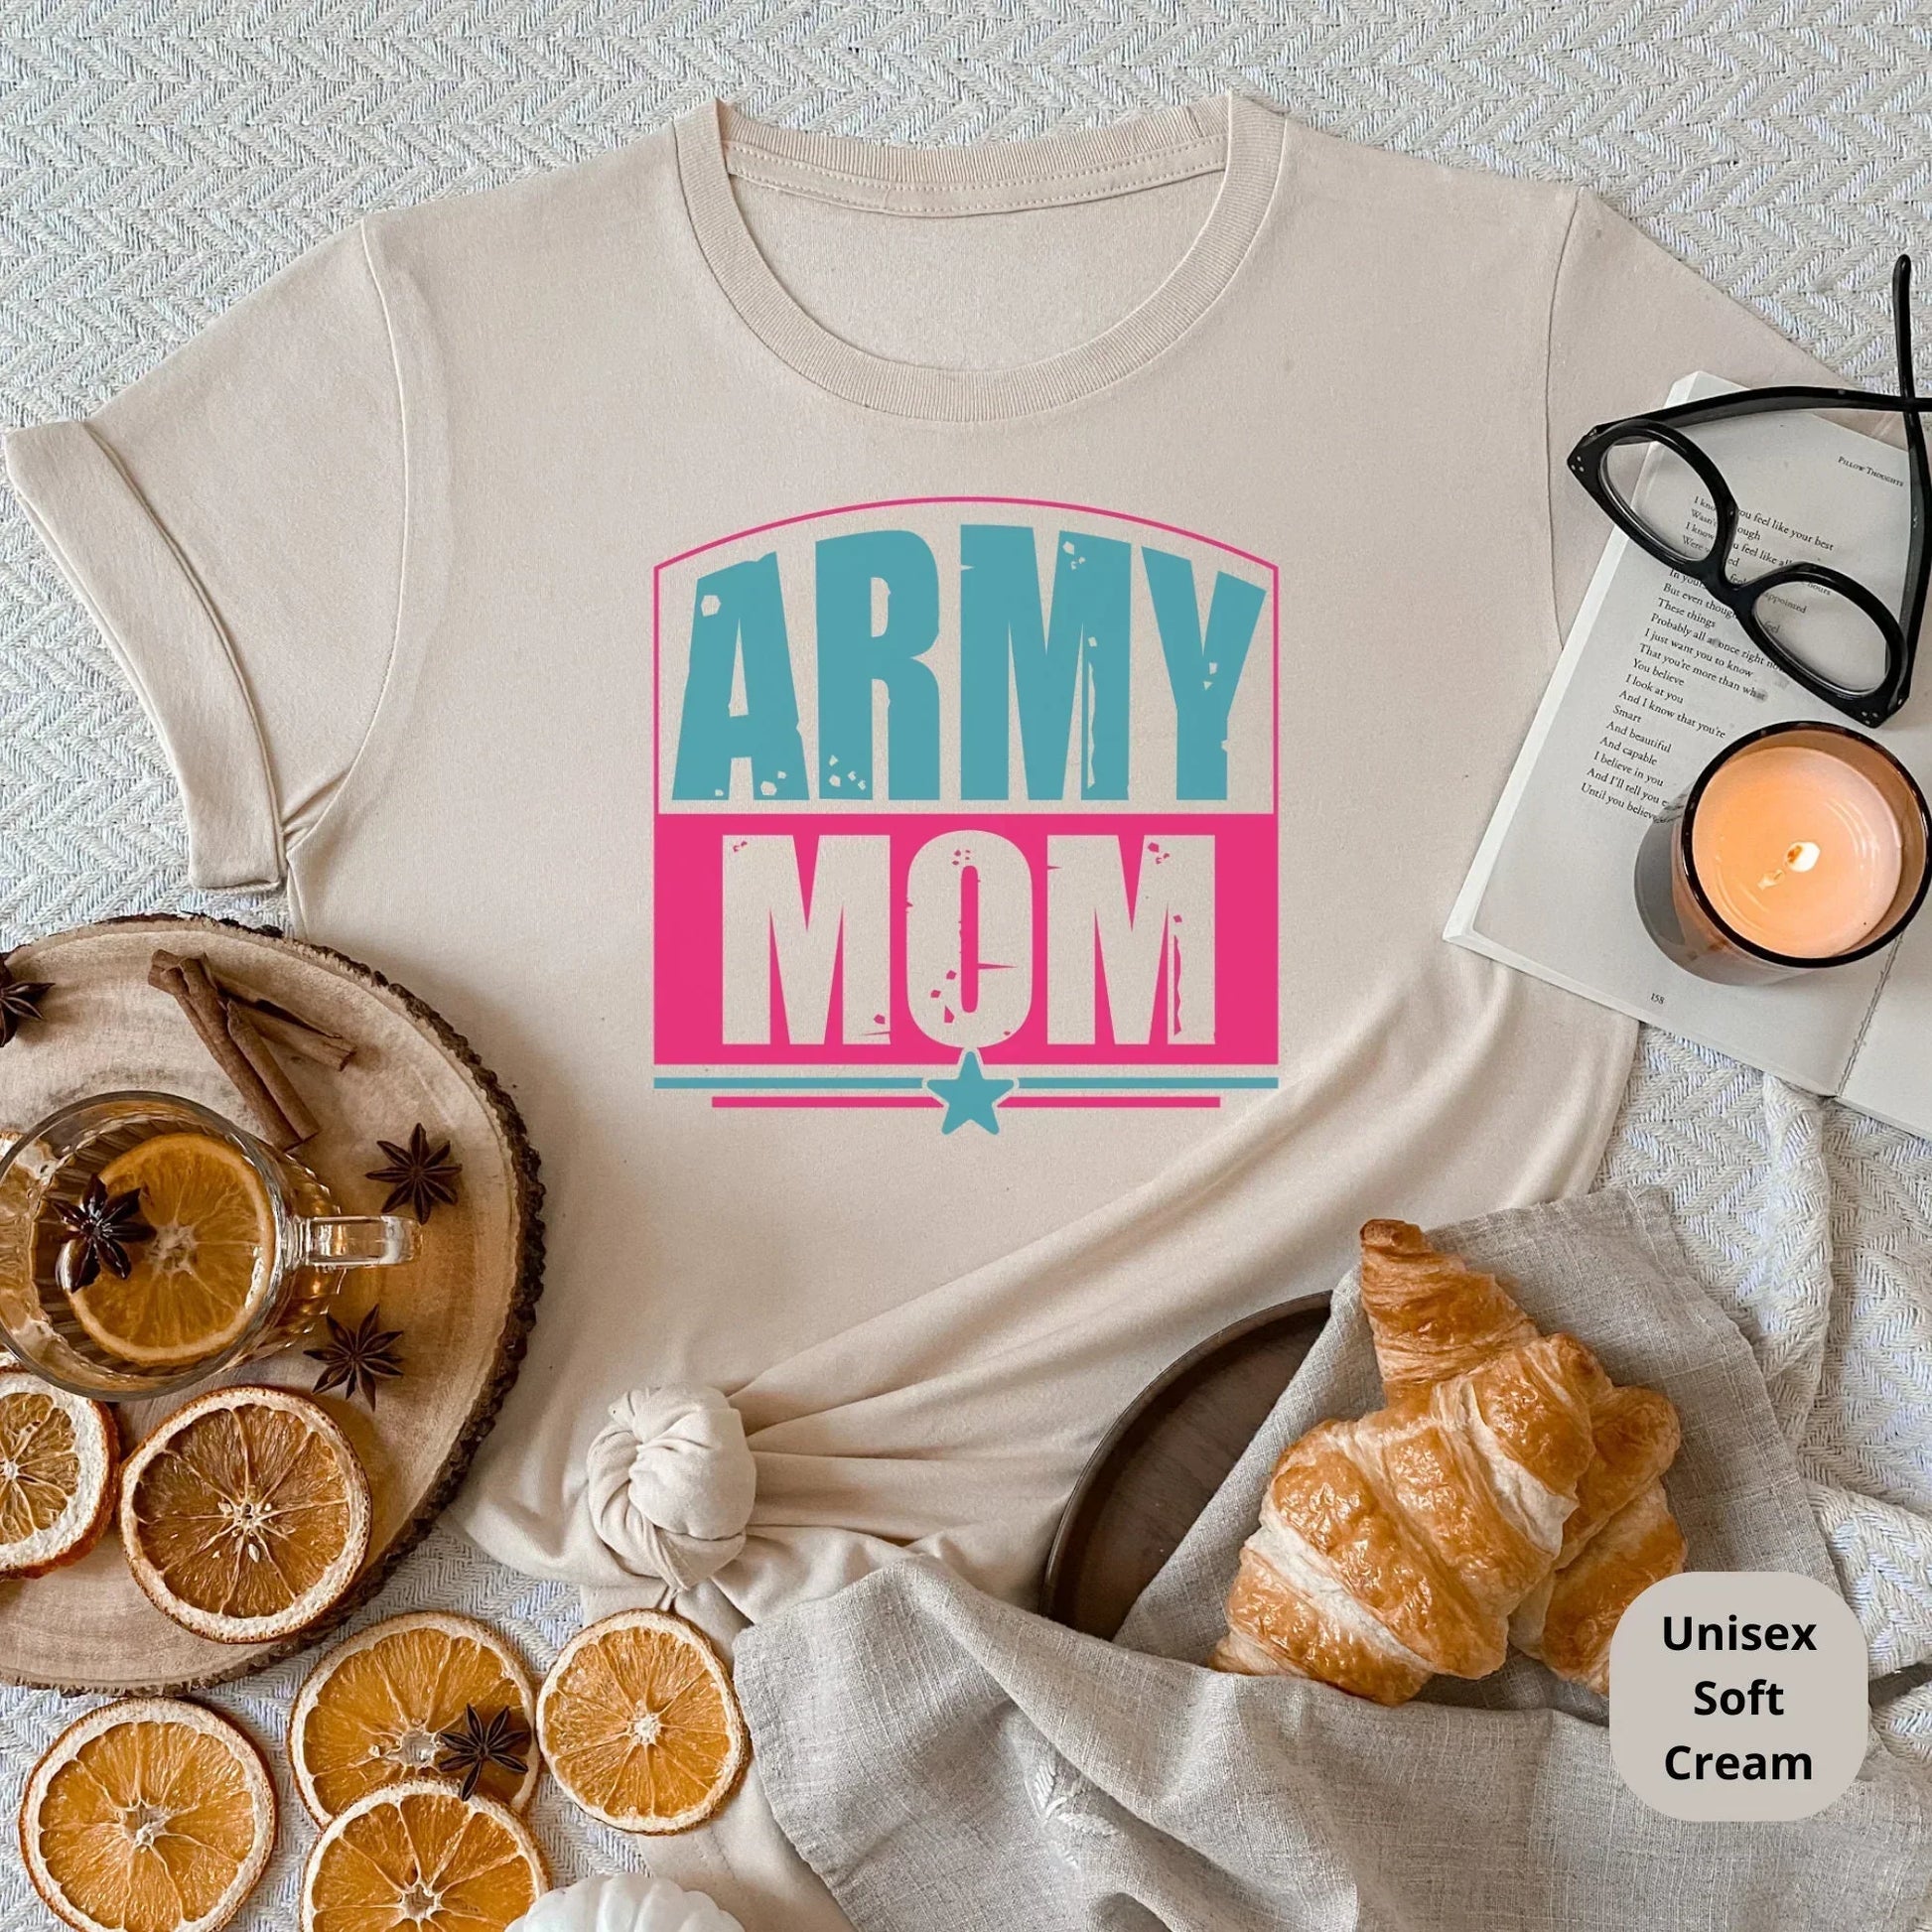 Army Mom Shirt, Army Wife, Military Mom Shirt, Military Wife Sweatshirt, Army Mom Gift, Air Force Mom, Support our troops, Navy Mom, US Army